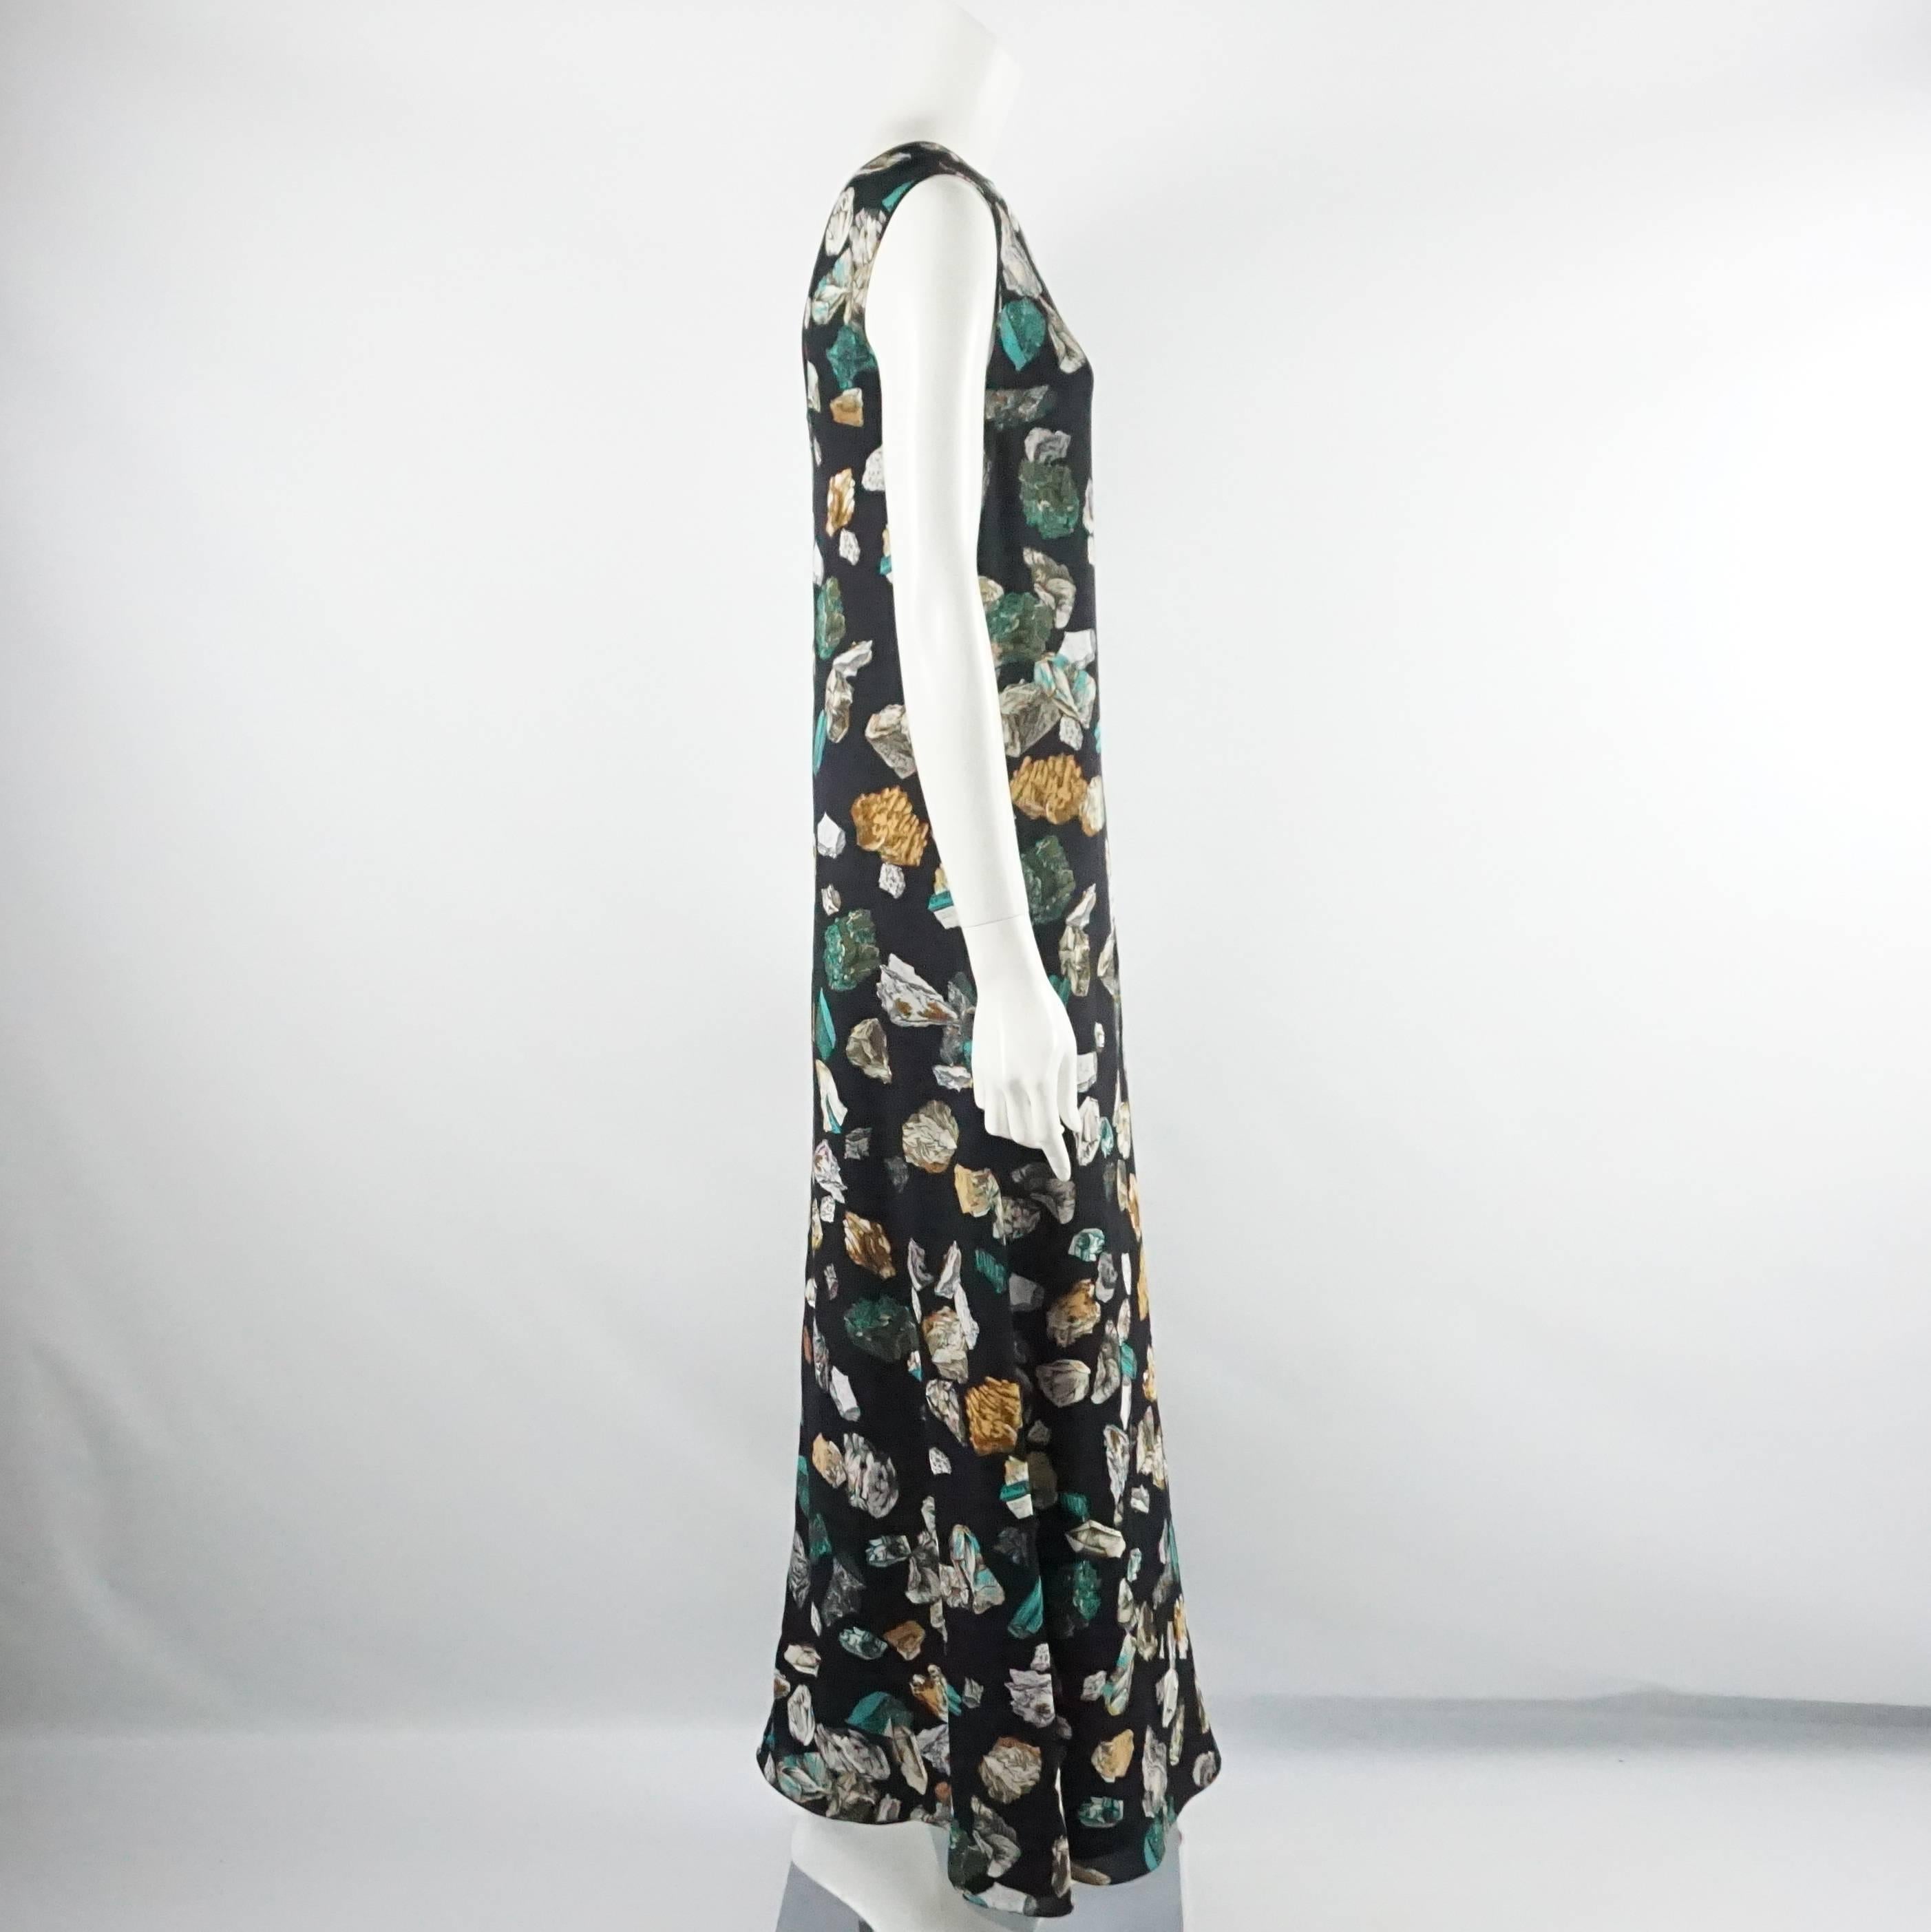 This Hermes maxi dress is brand new with tags and was a runway piece in Fall 2013. This dress is black crepe with a stone print and titled "Mineraux." It has a round neck and deep "V" back with a effortlessly flowy look. Size 36,